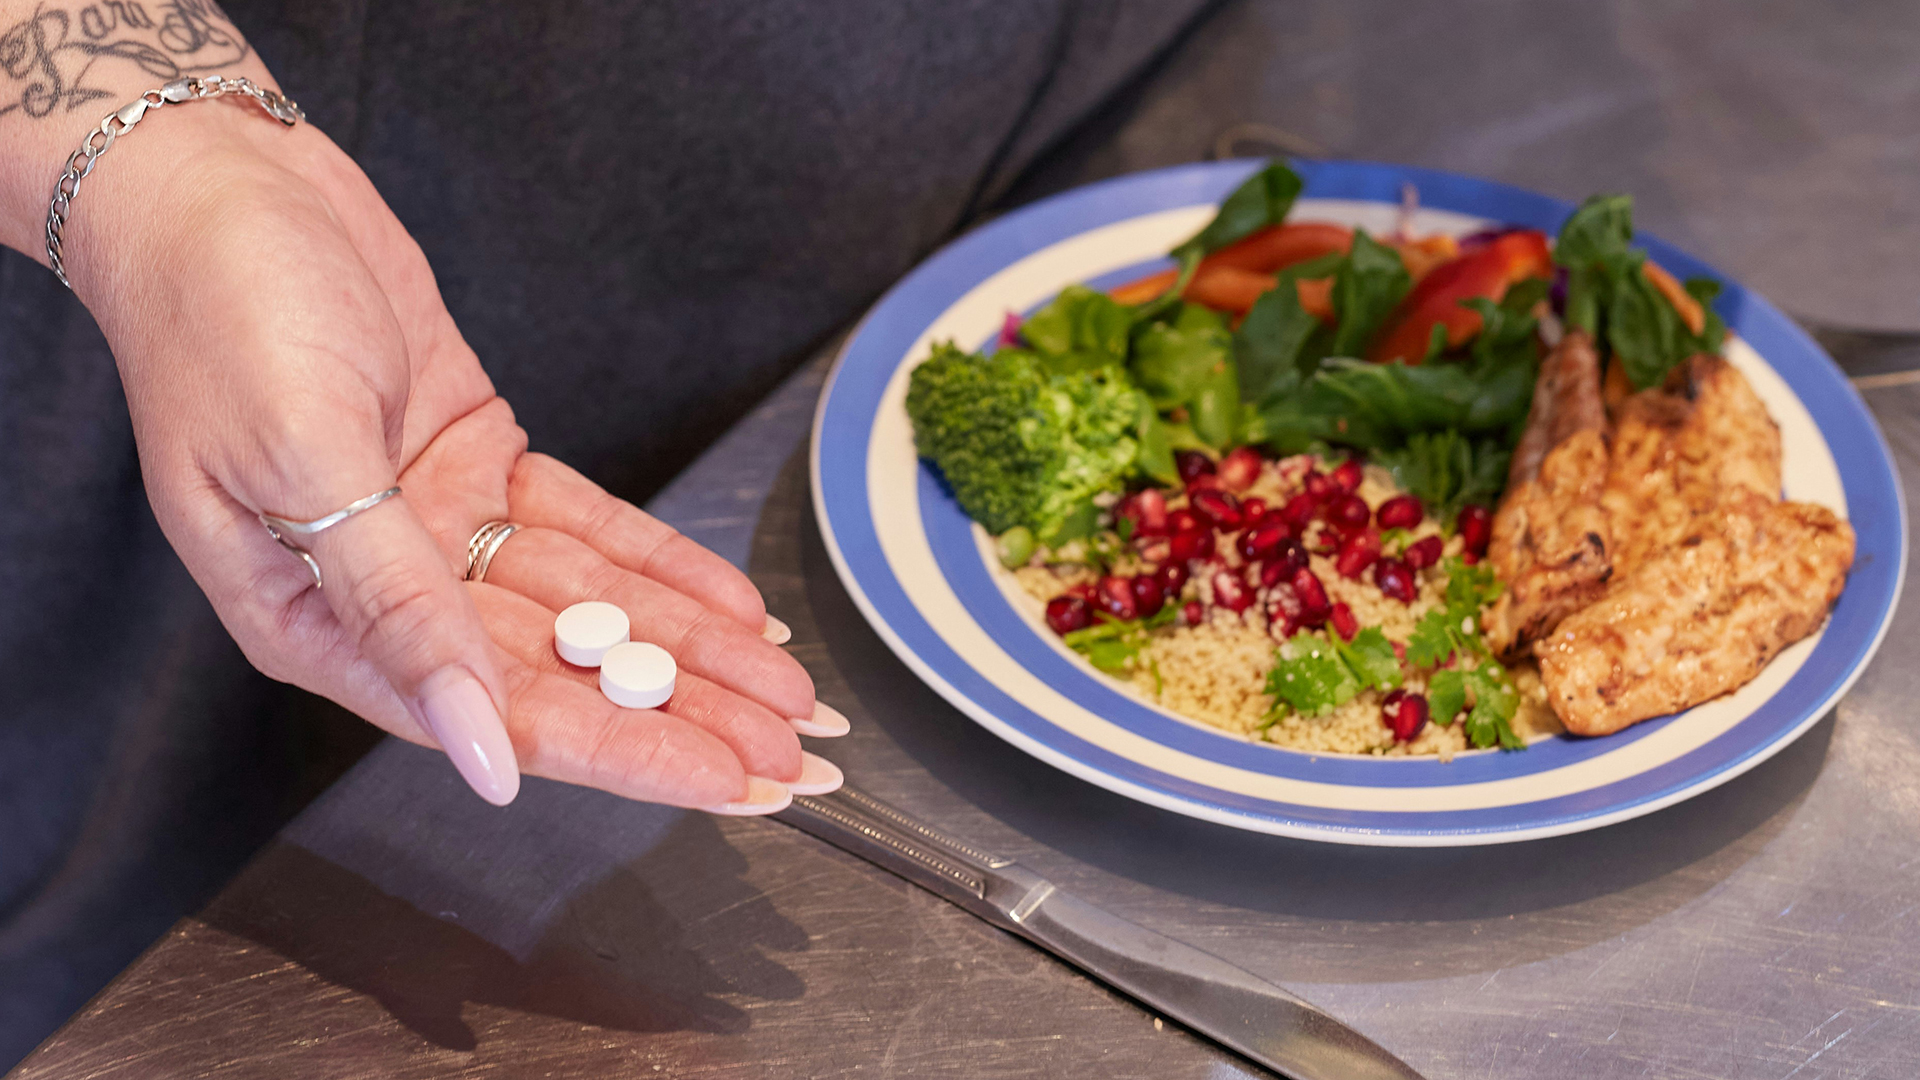 A person’s hand holding medication next to a plate of food